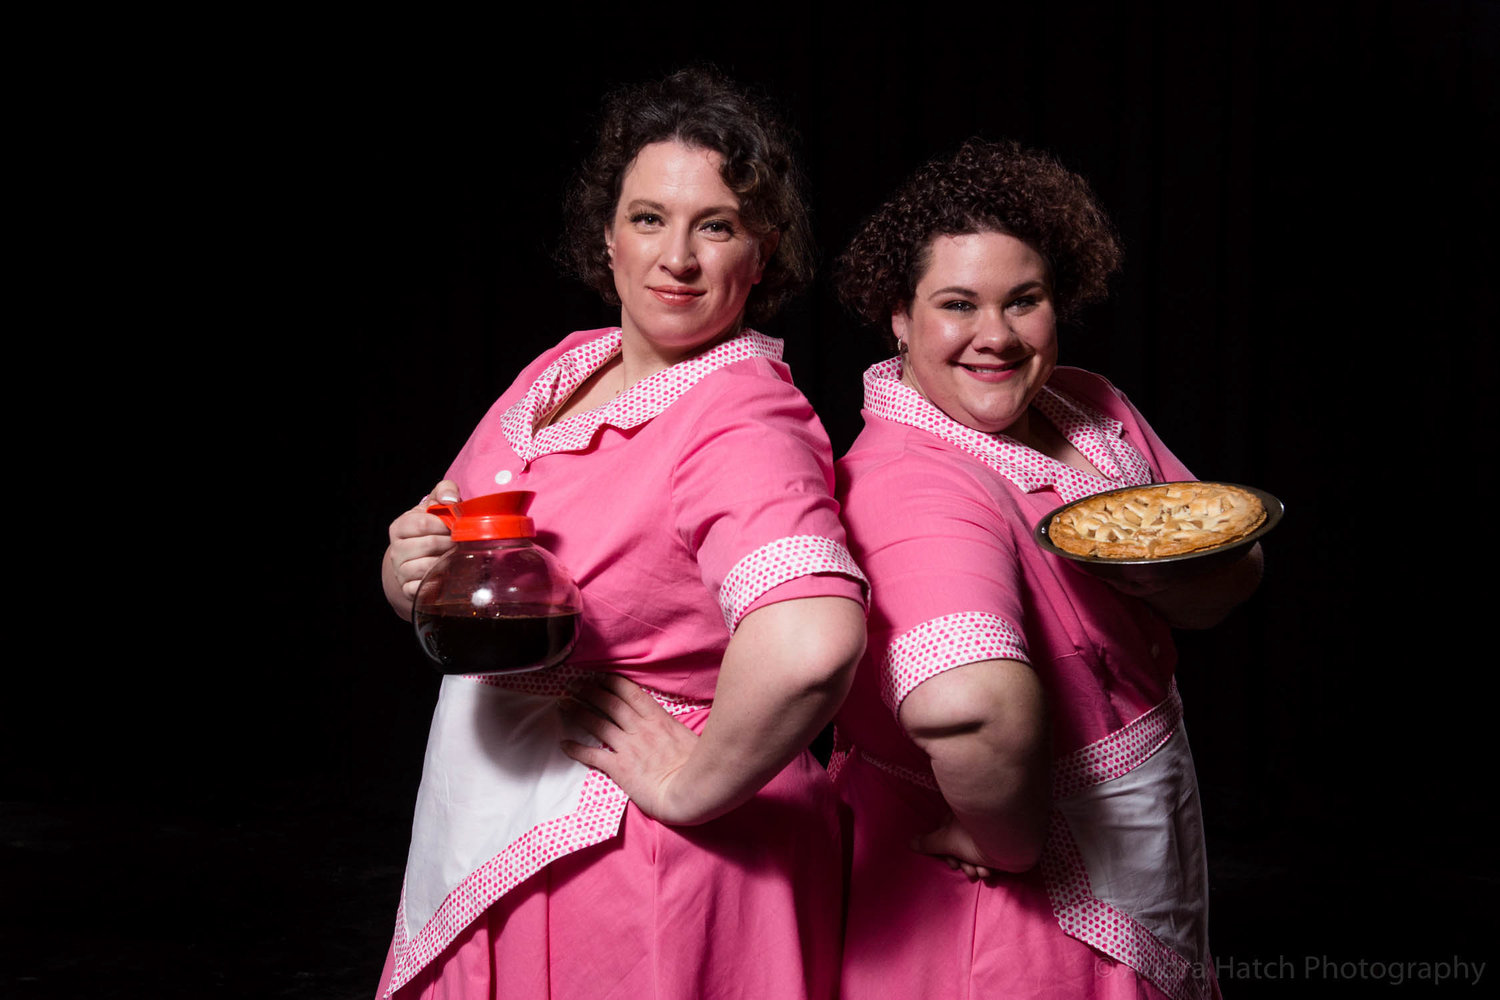 Meet the Dinettes!! Sara Sturdivant and Kelsey Franklin as Prudie and Rhetta Cupp.